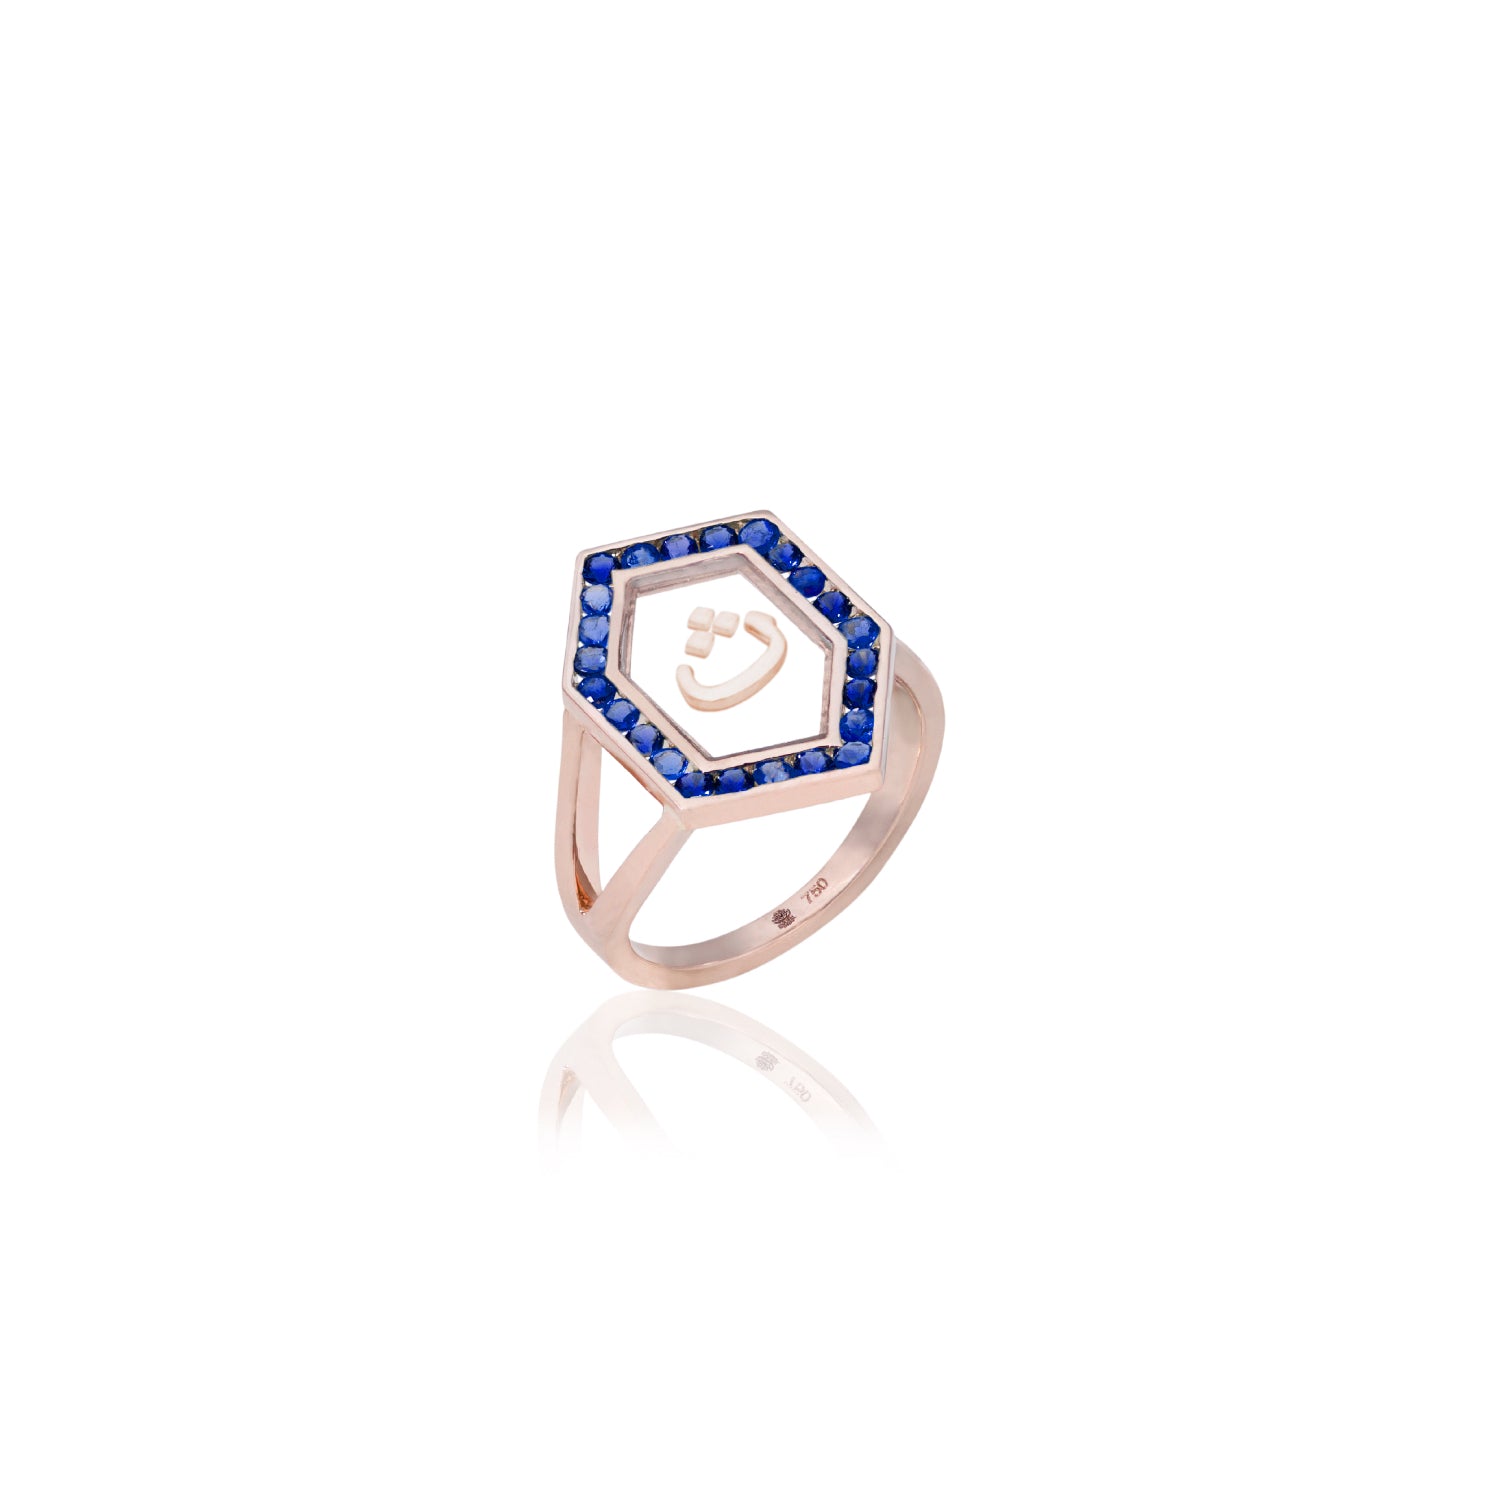 Qamoos 1.0 Letter ث Sapphire Ring in Rose Gold